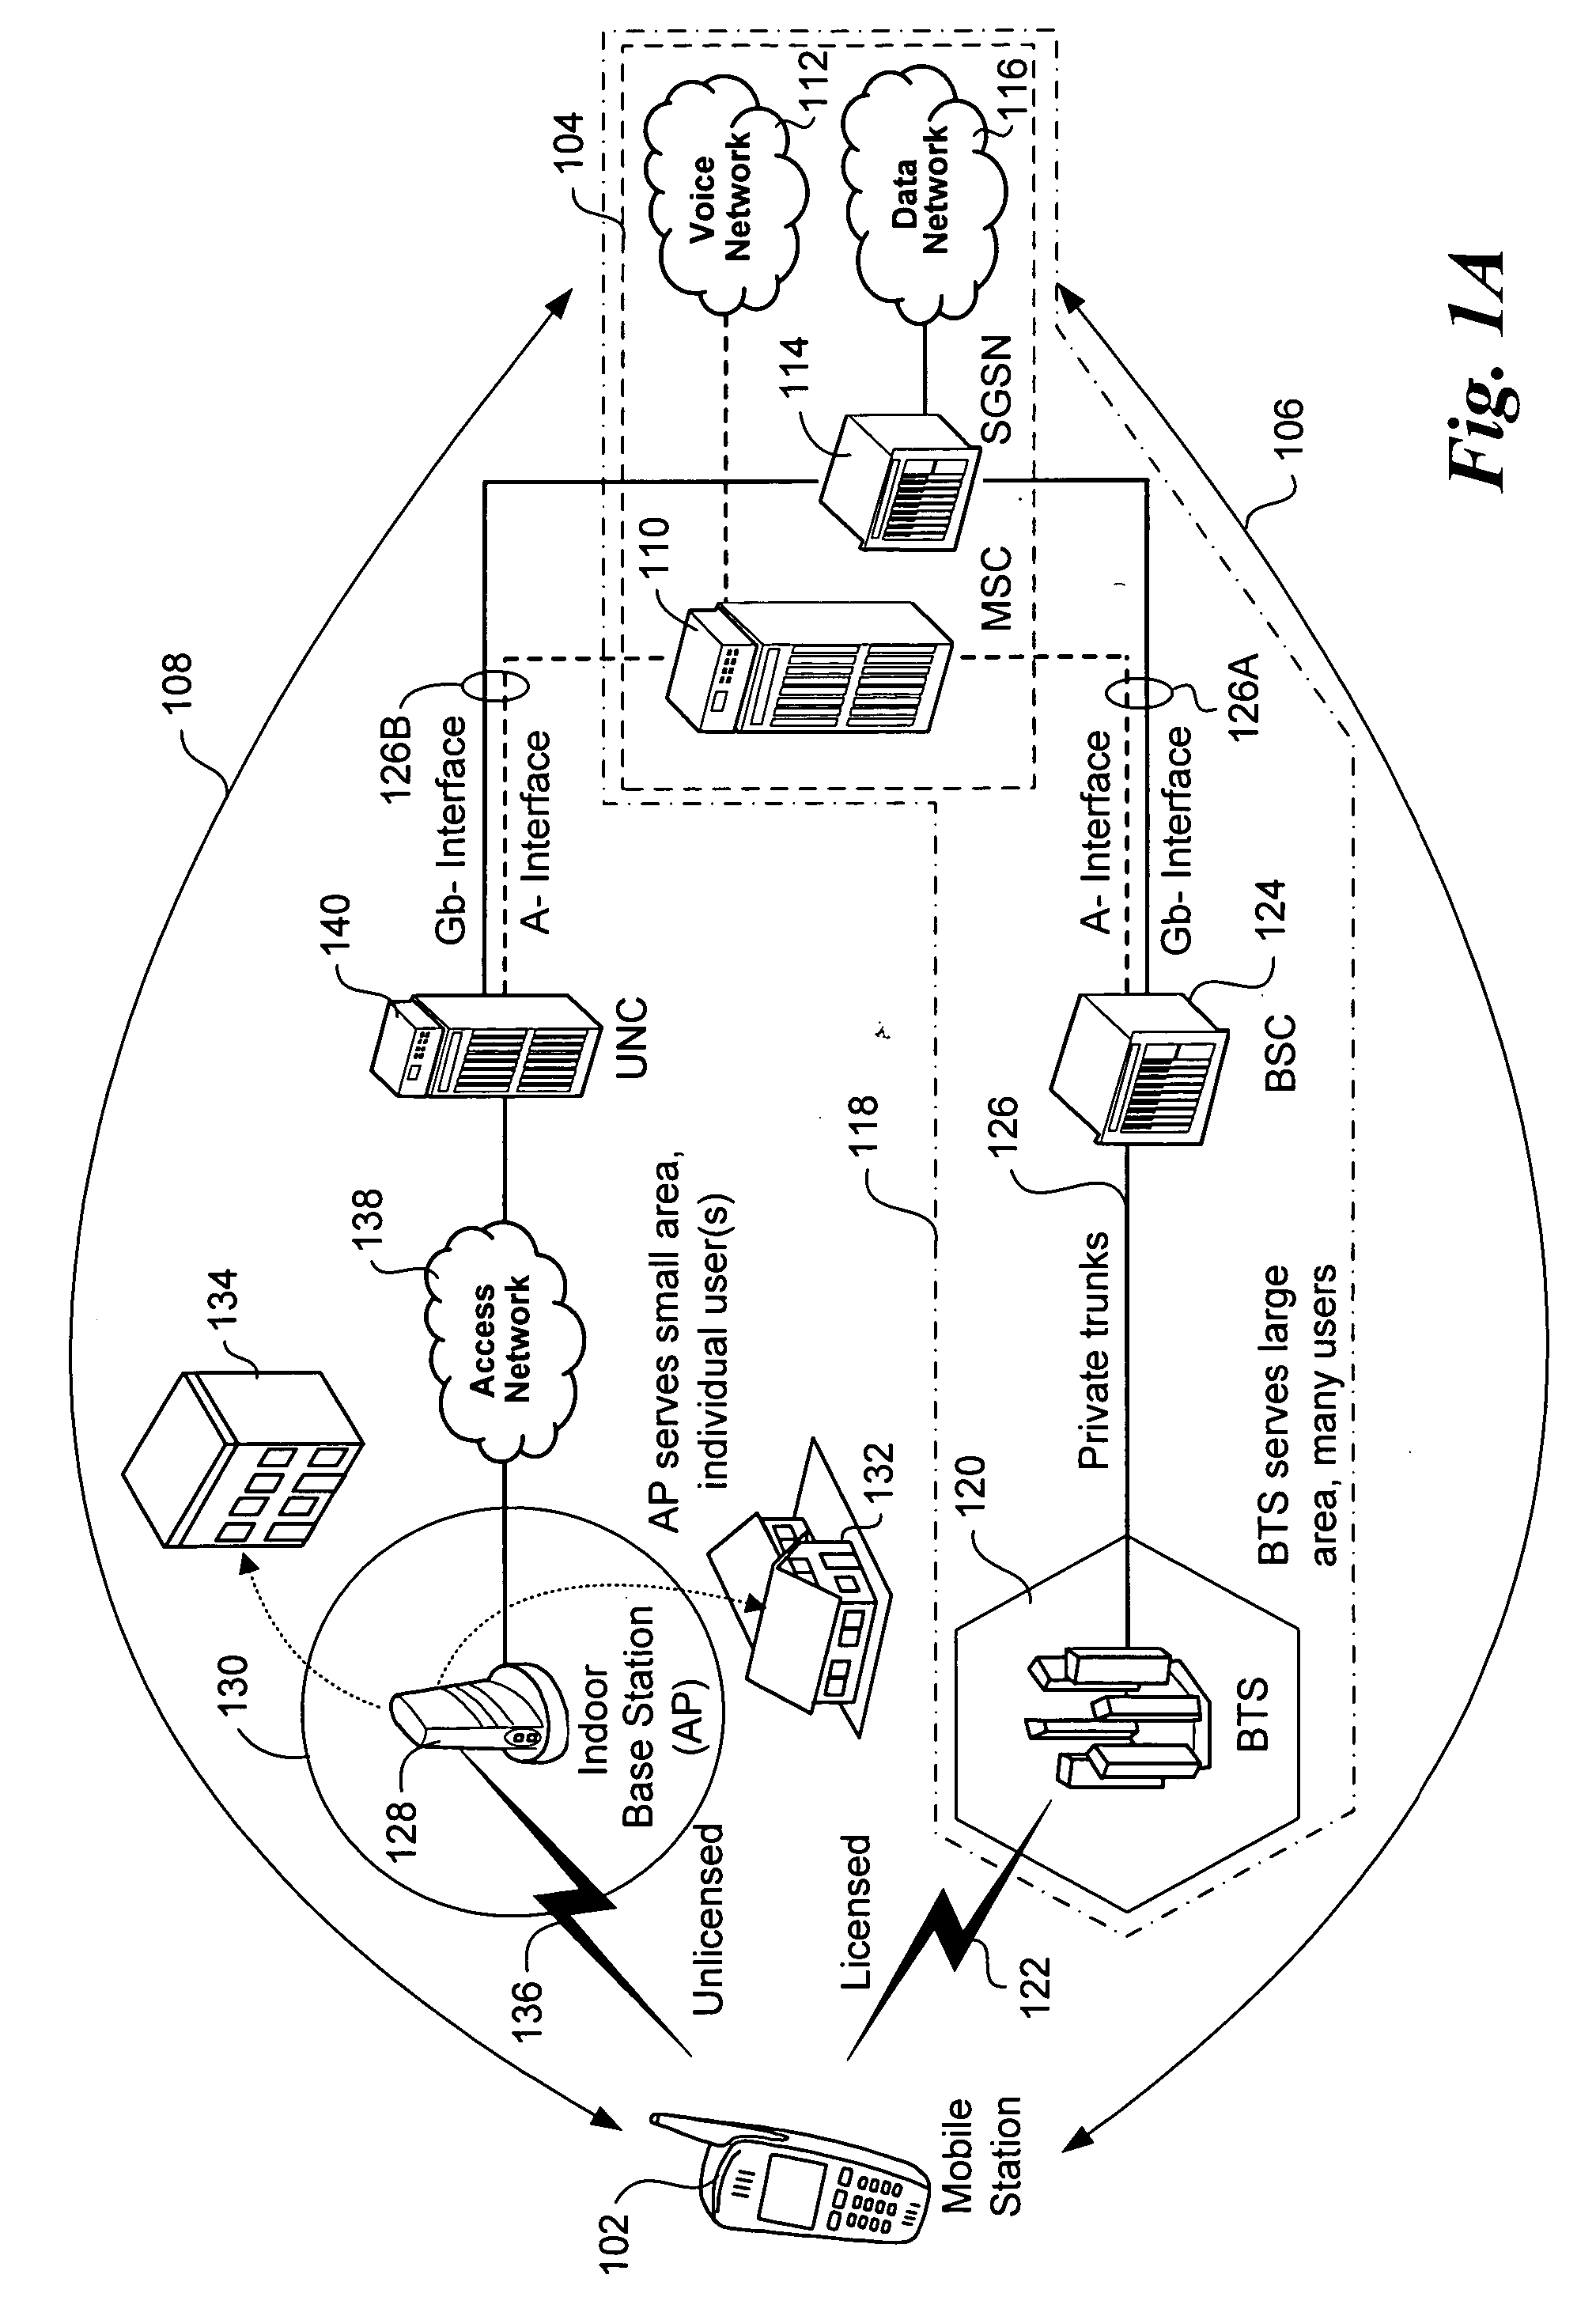 Apparatus and messages for interworking between unlicensed access network and GPRS network for data services